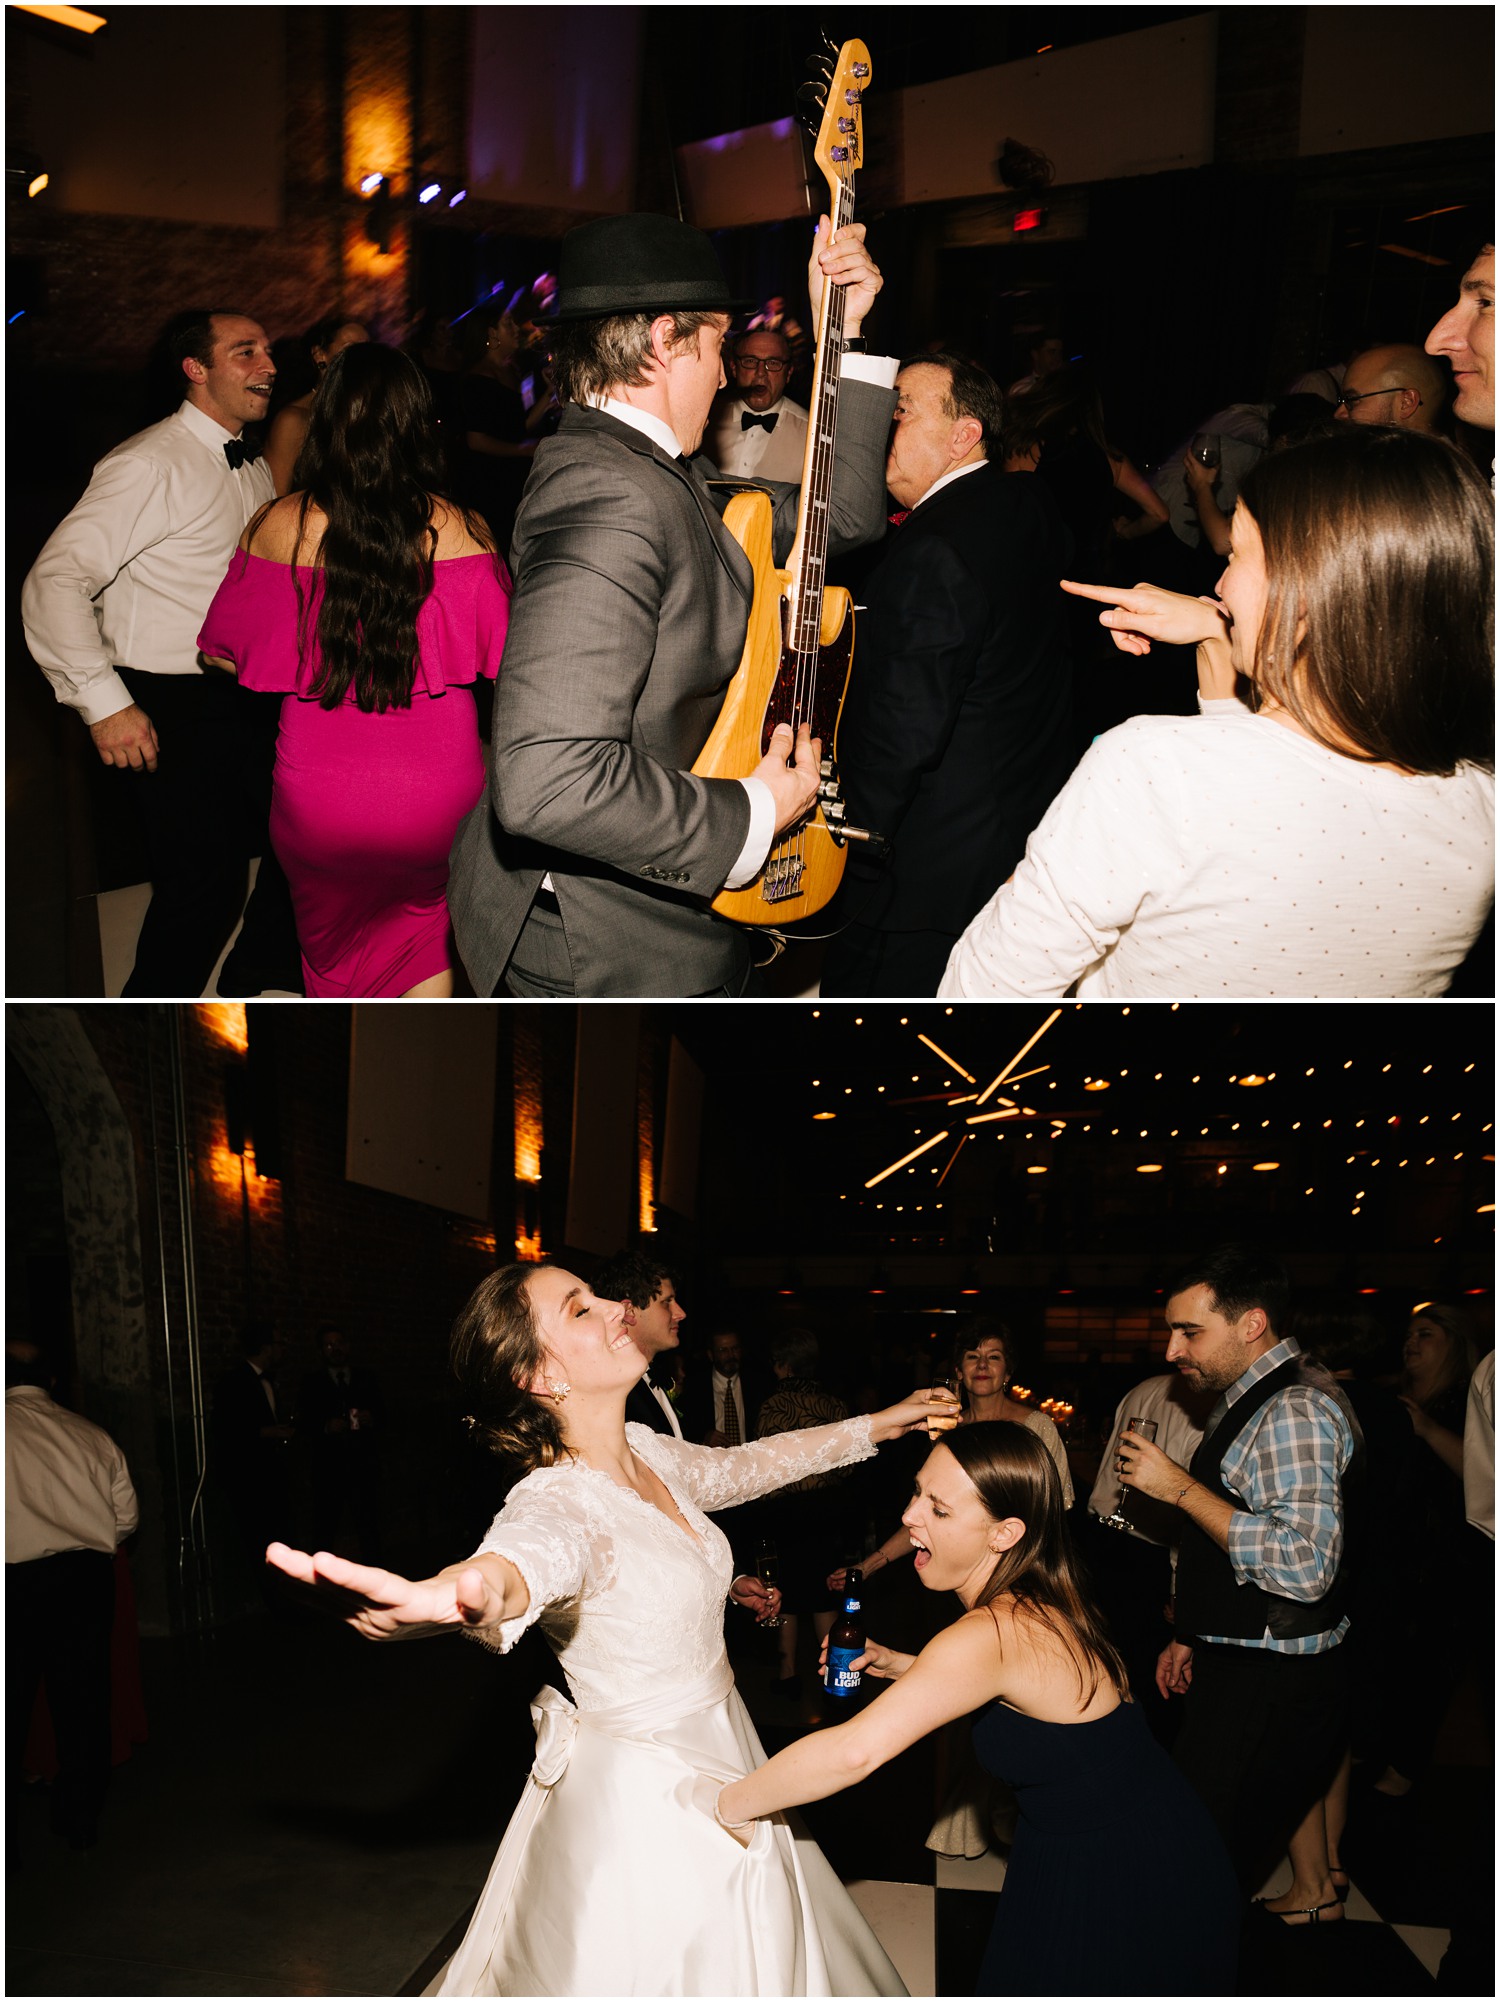 bride dances with wedding guest while guitar player walks around dancing at wedding reception